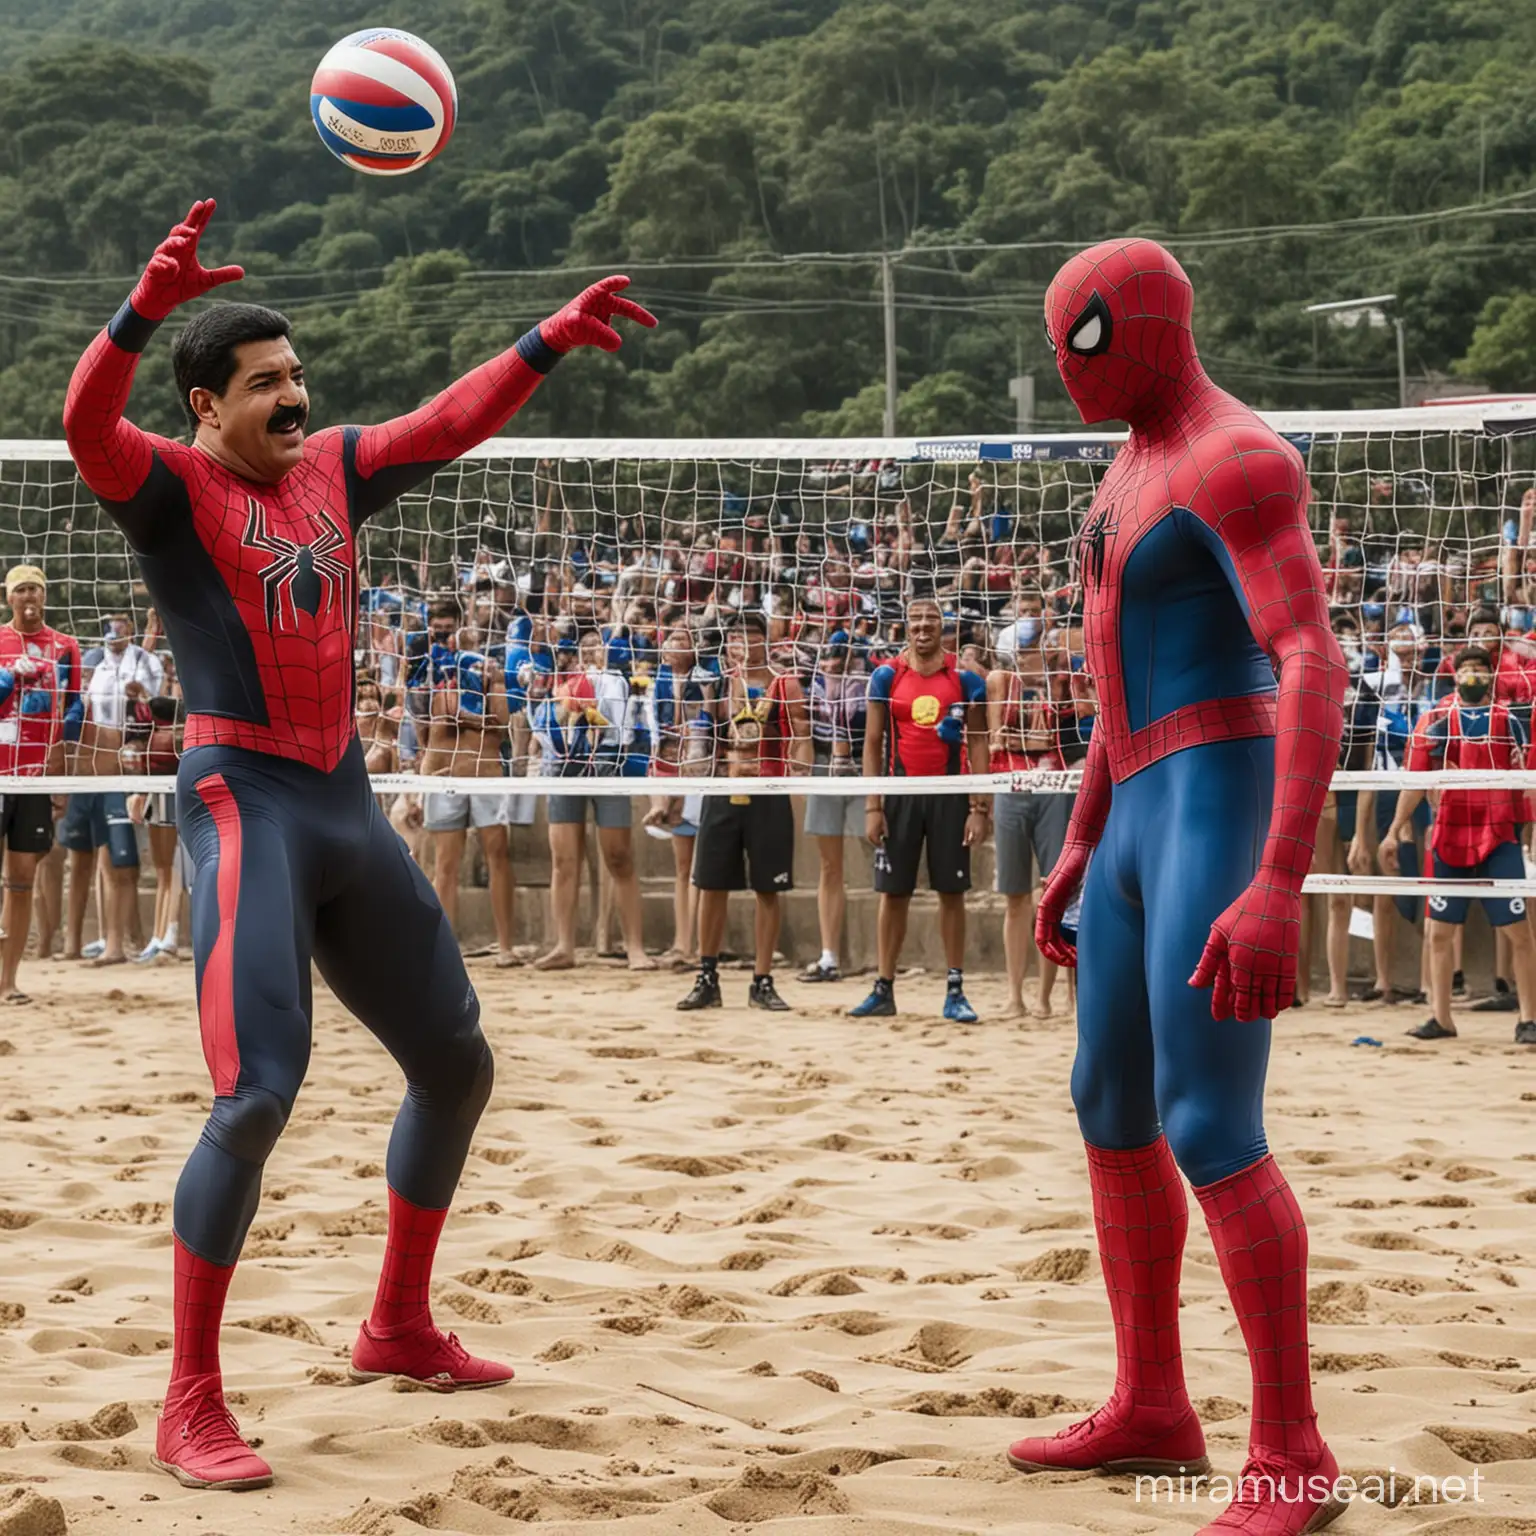 Nicols Maduro and Spiderman Volleyball Match Unlikely Duo Spikes Fun